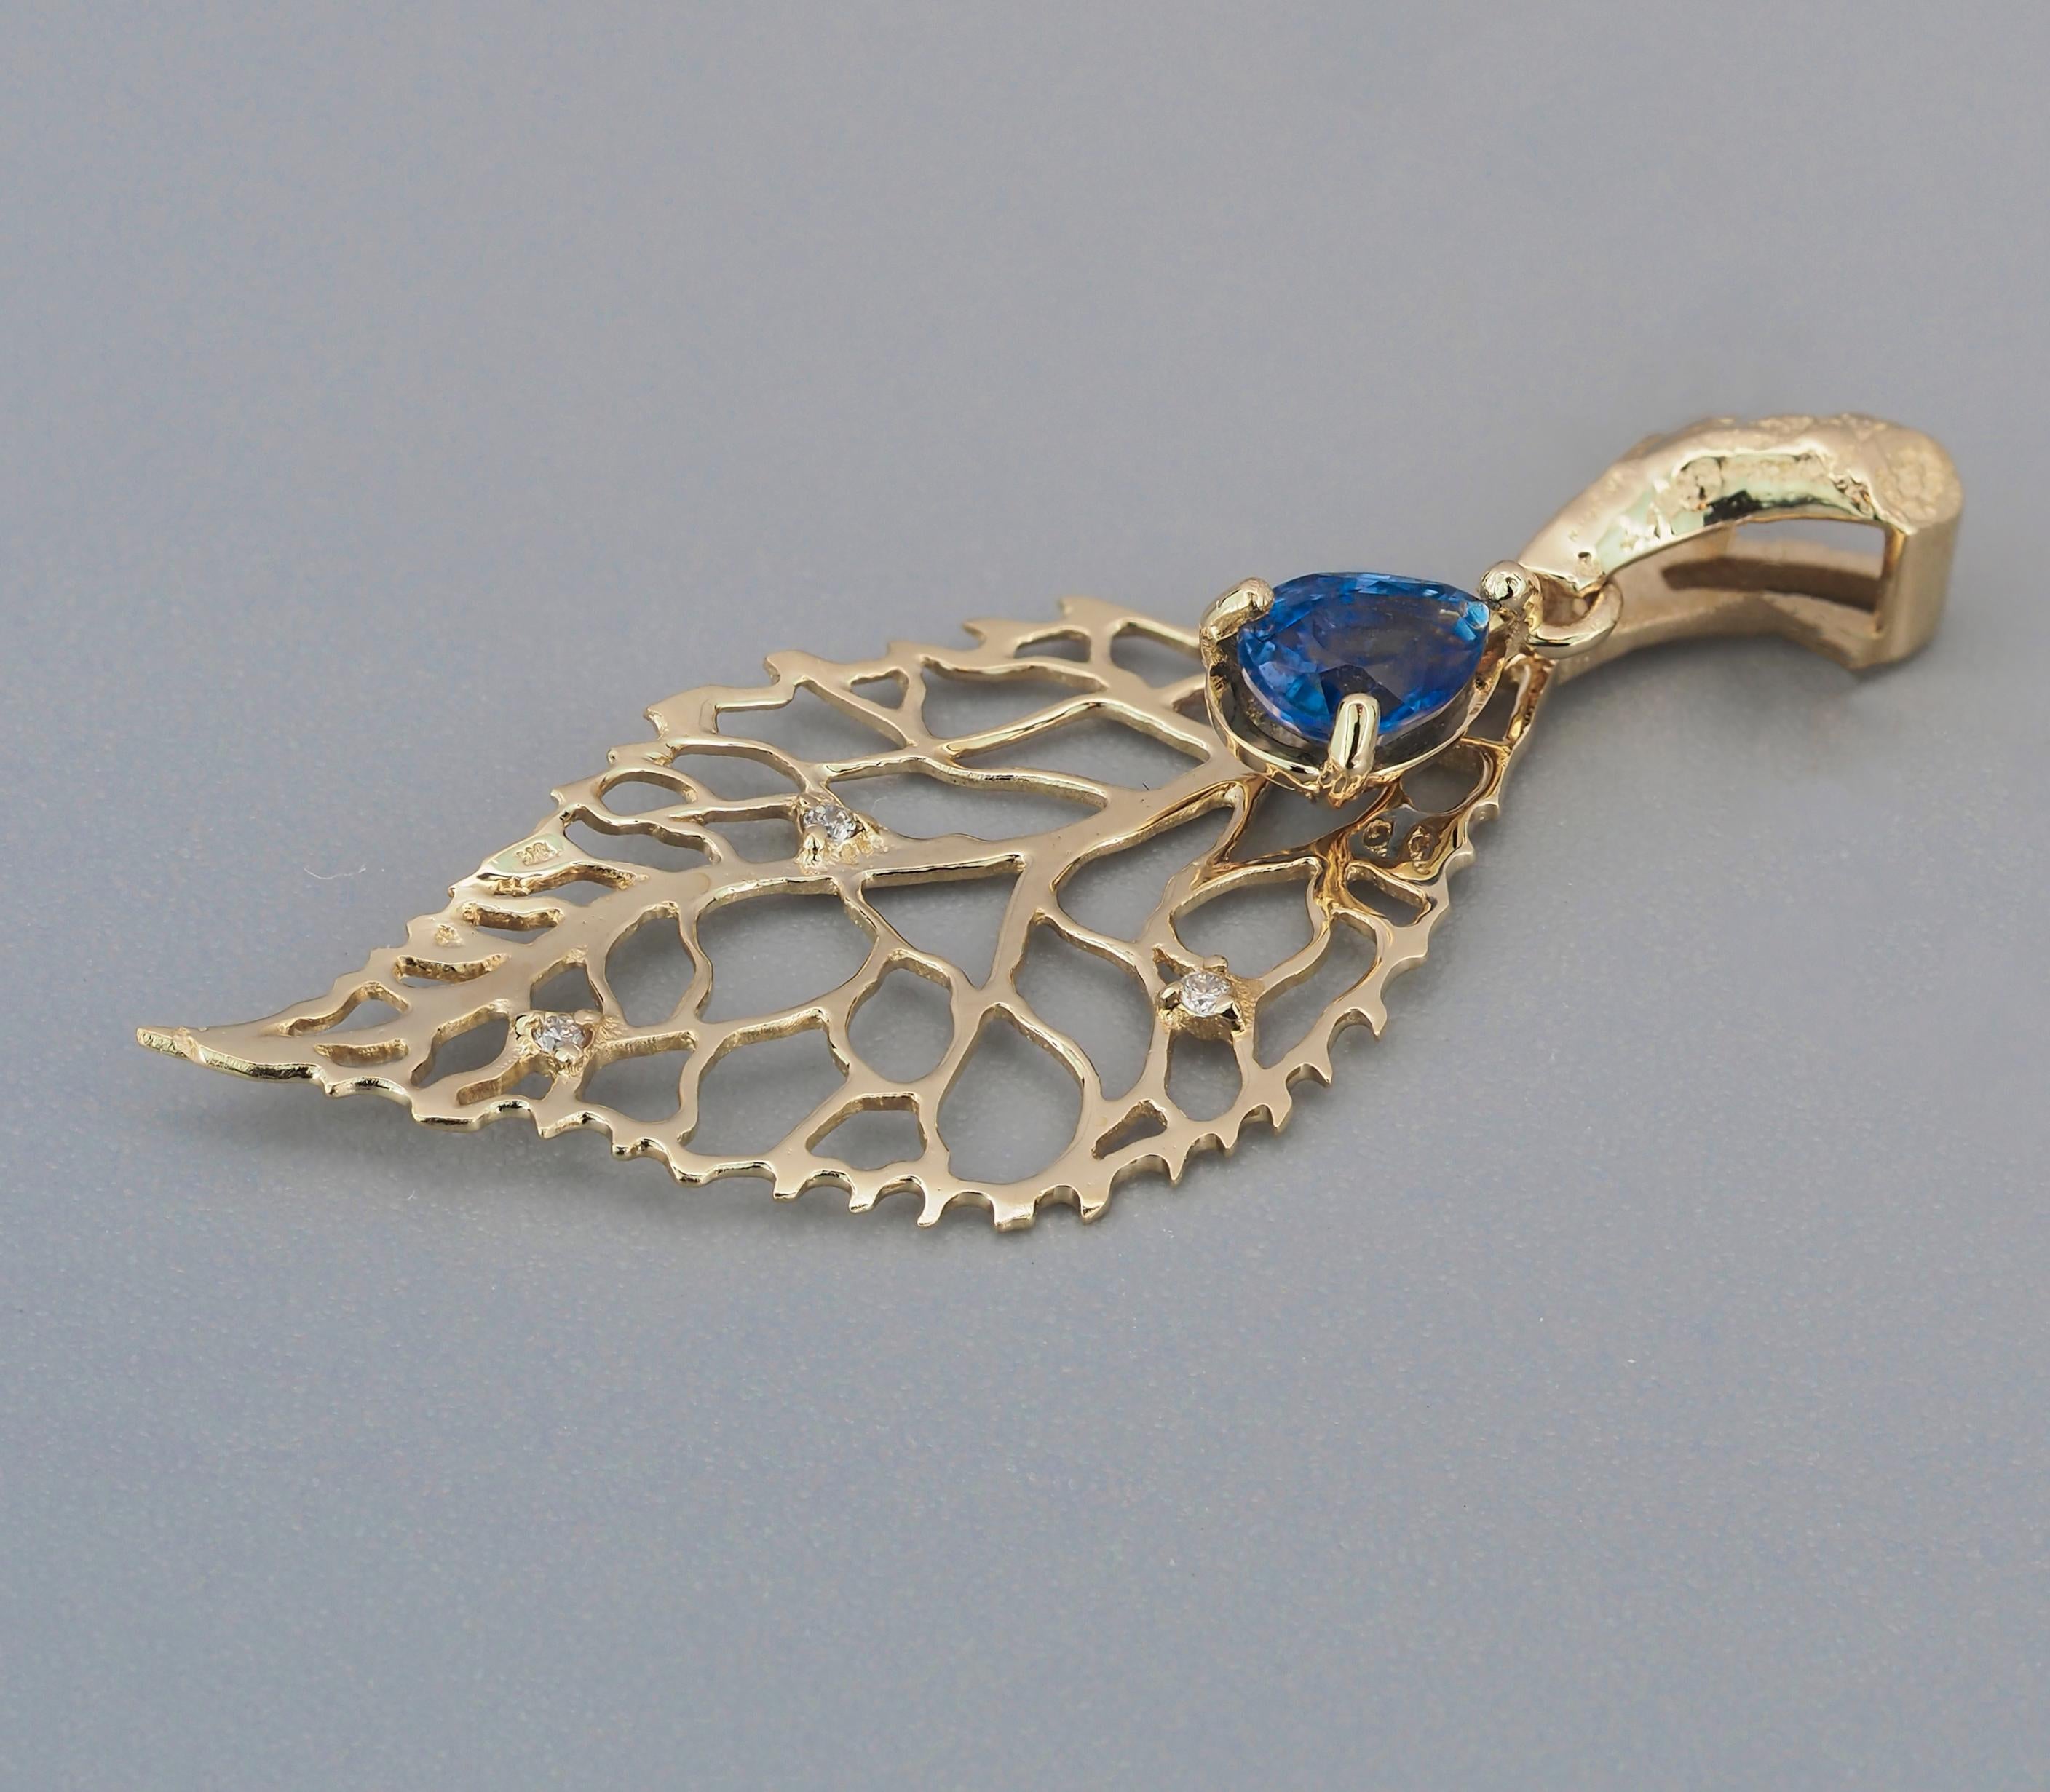 Leaf pendant with sapphire, diamonds. 
14k gold leaf pendant. Pear sapphire pendant. Blue sapphire pendant. Small Leaf, Mini Charm Necklace.

Metal: 14k gold
Weight: 1.2 g.
Pendant size in mm - 37х14.86 mm.

Central stone: sapphire
Cut: pear
Weight: